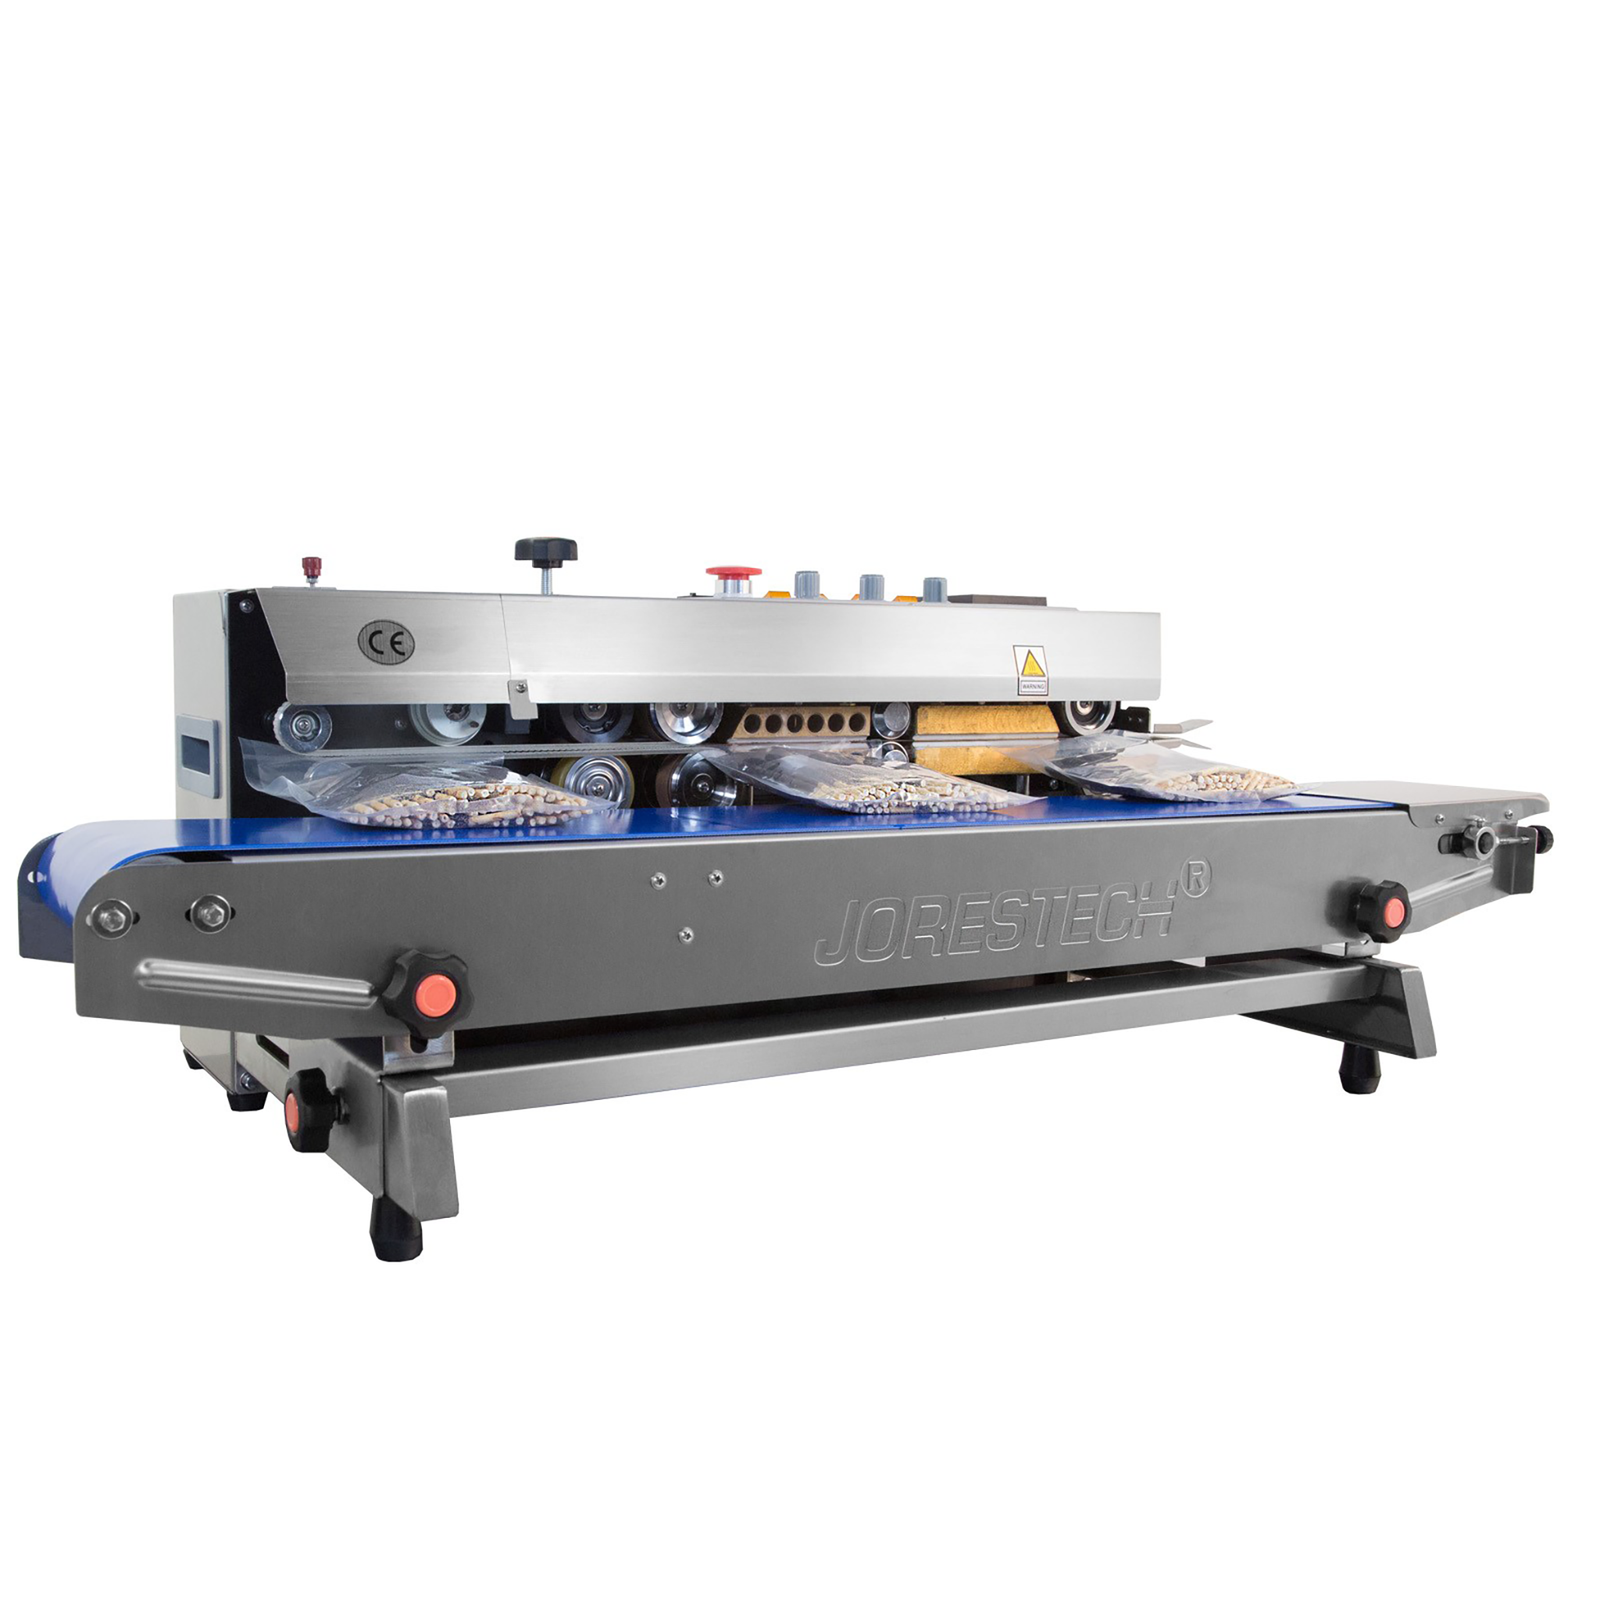 JORESTECH Continuous band sealer with coder is set in an horizontal while sealing bags filled with product.